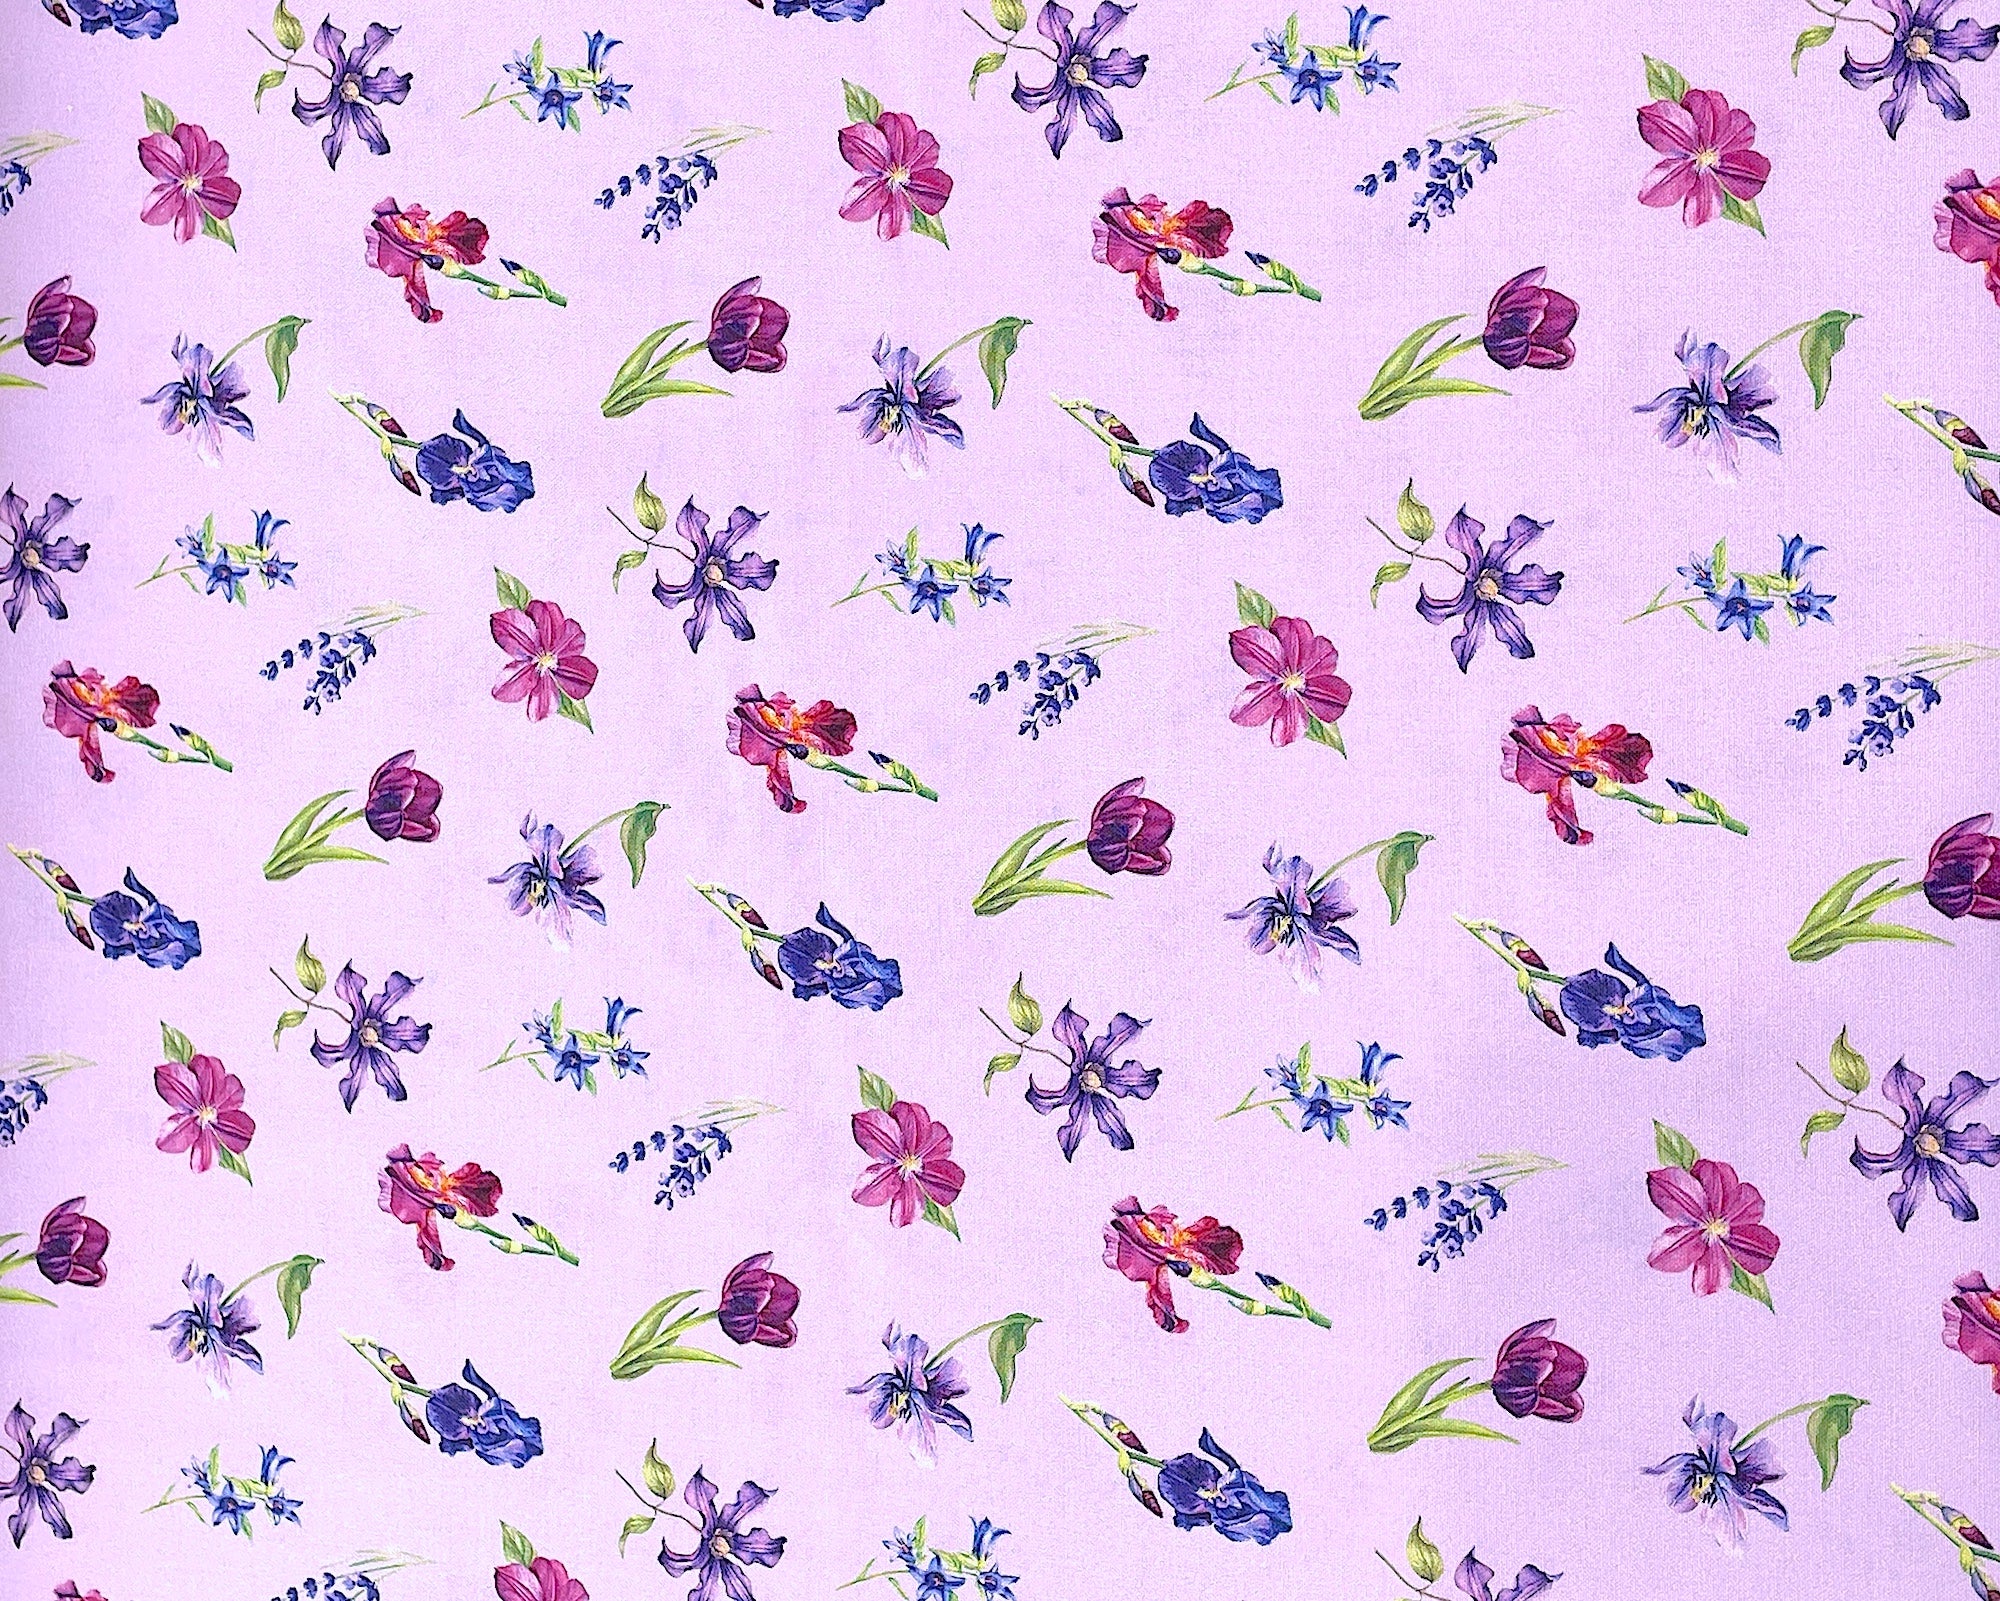 From Northcott Fabrics this light purple fabric is covered with iris, clematis and more. This fabric is part of the Deborah's Garden collection.